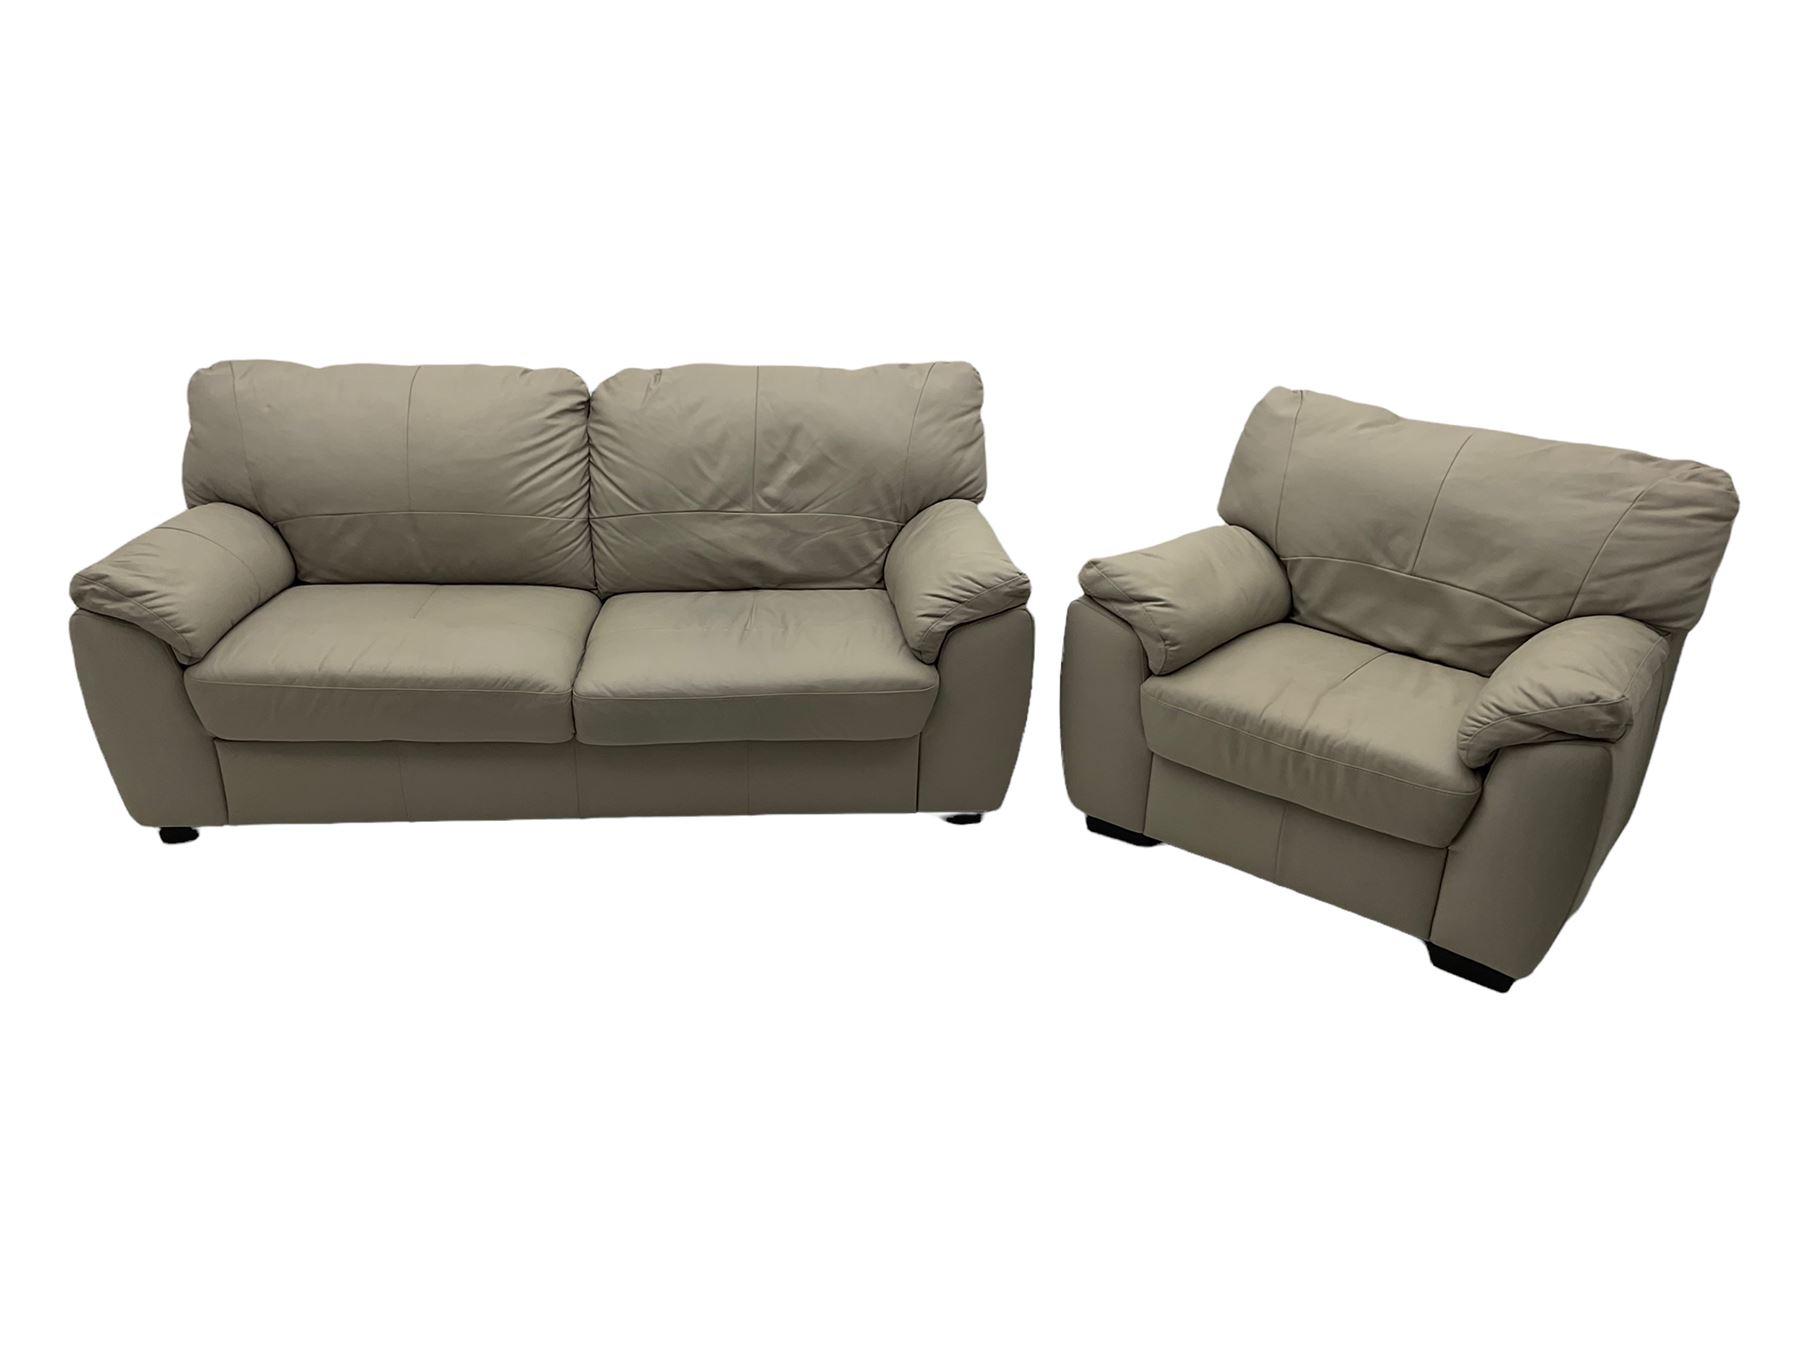 Two seat sofa (W185cm) - Image 4 of 8